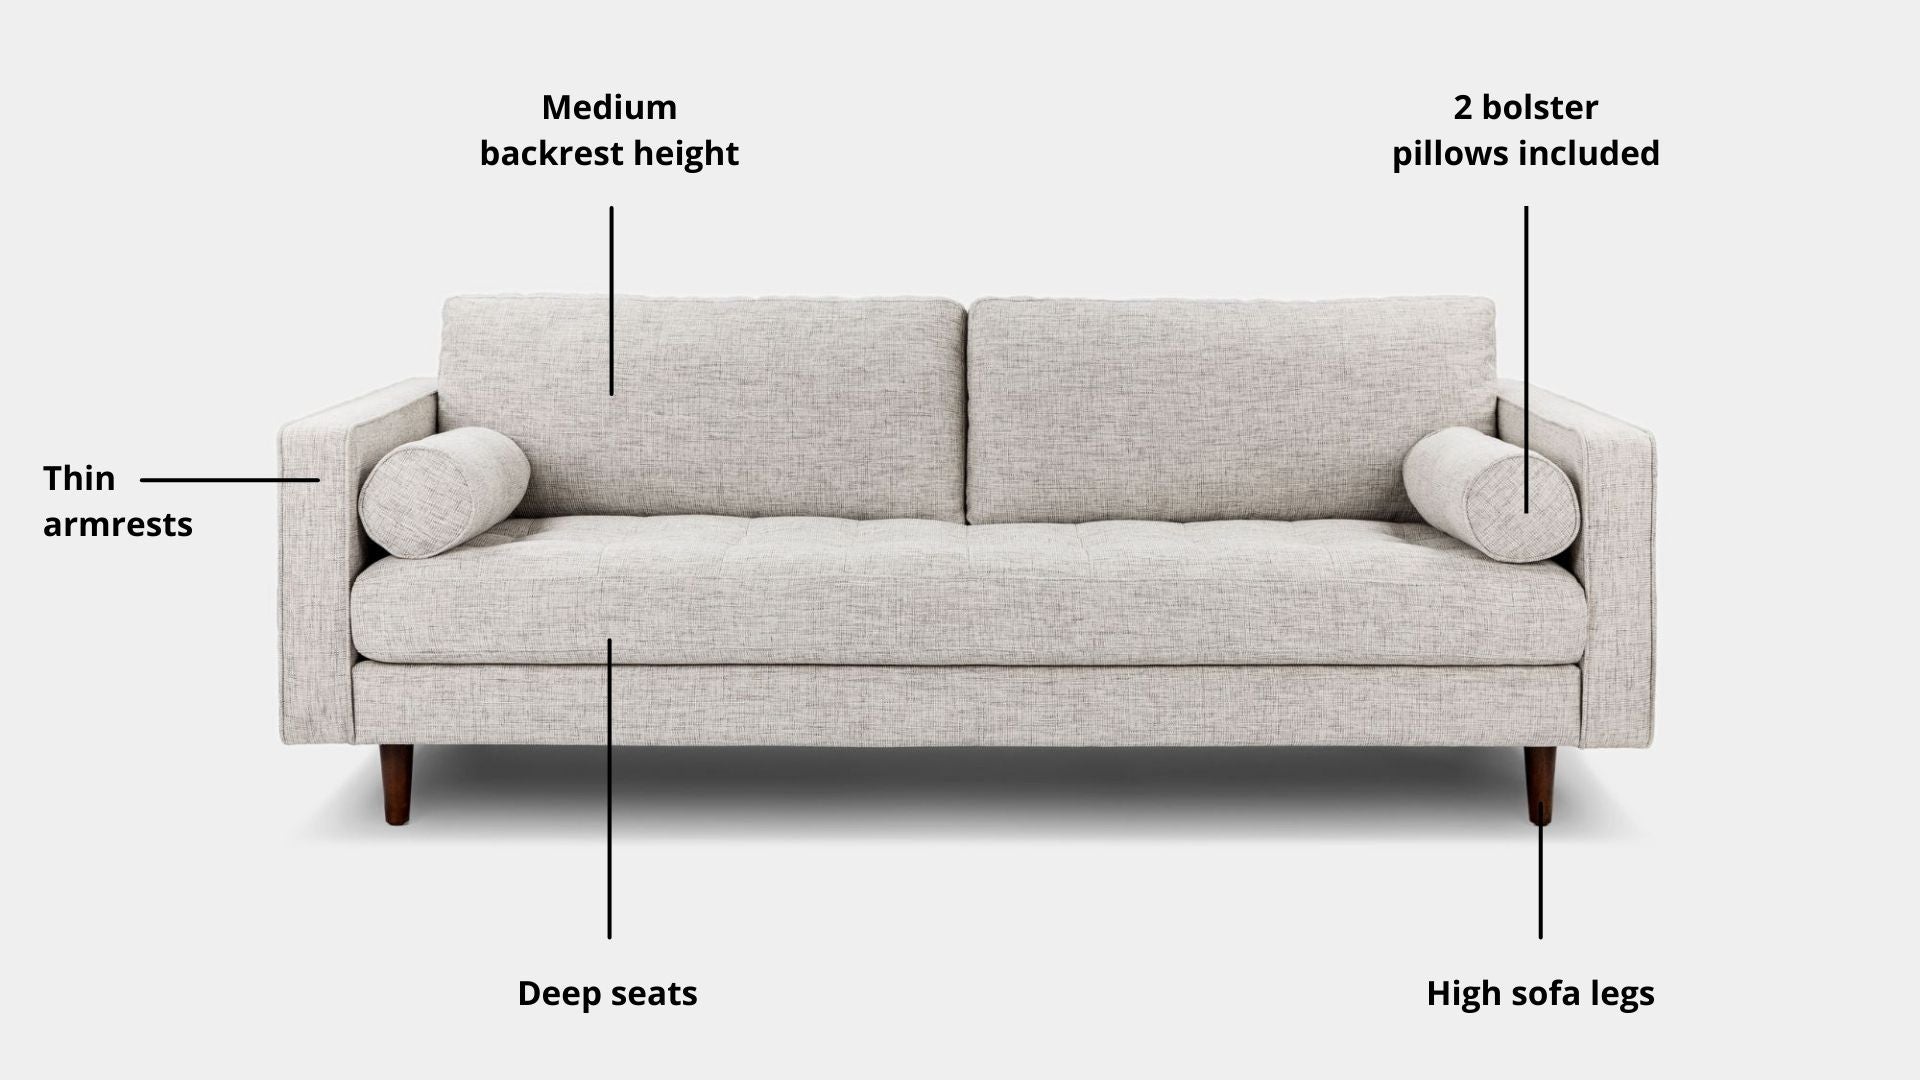 Key features such as armrest thickness, cushion height, seat depth and sofa leg height for Castle Fabric Sofa